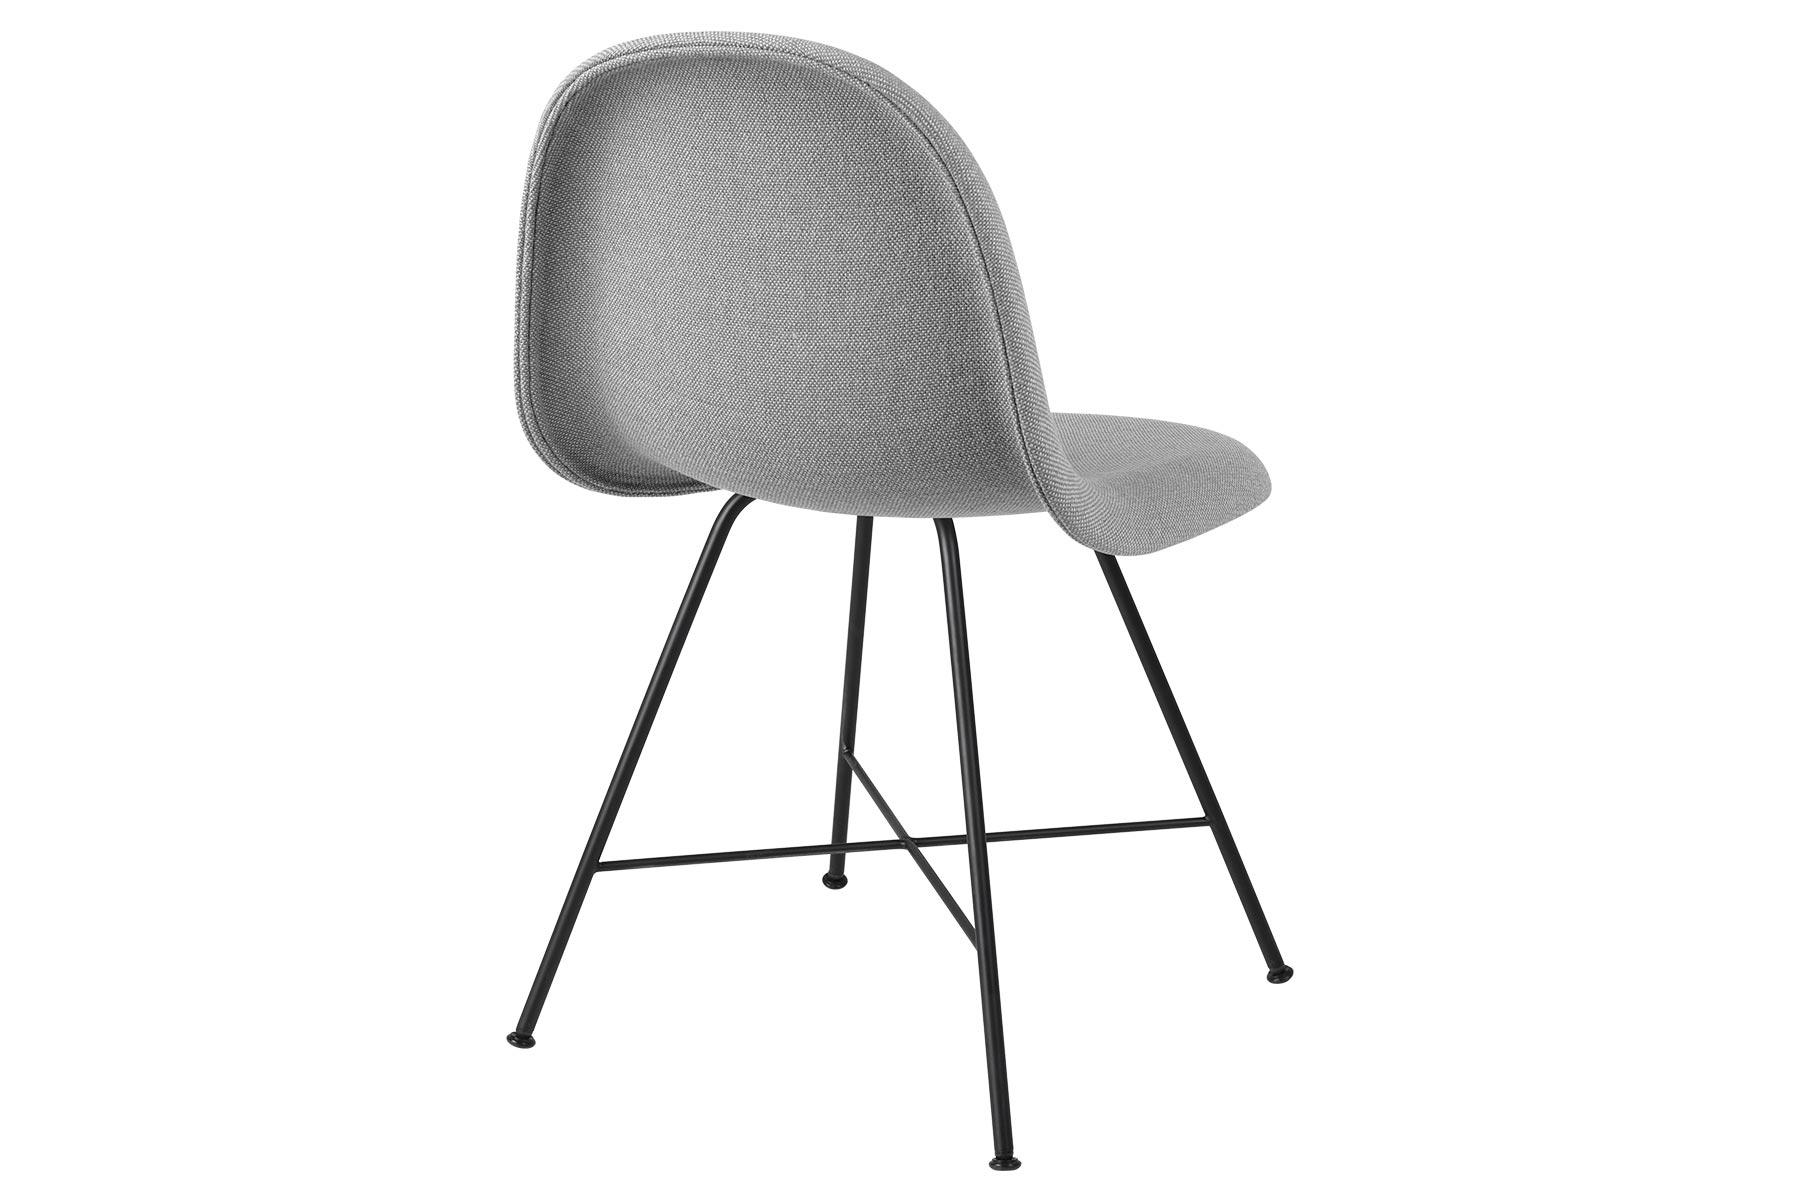 3D Dining Chair, Fully Upholstered, Center Base, Matte Black In Excellent Condition For Sale In Berkeley, CA